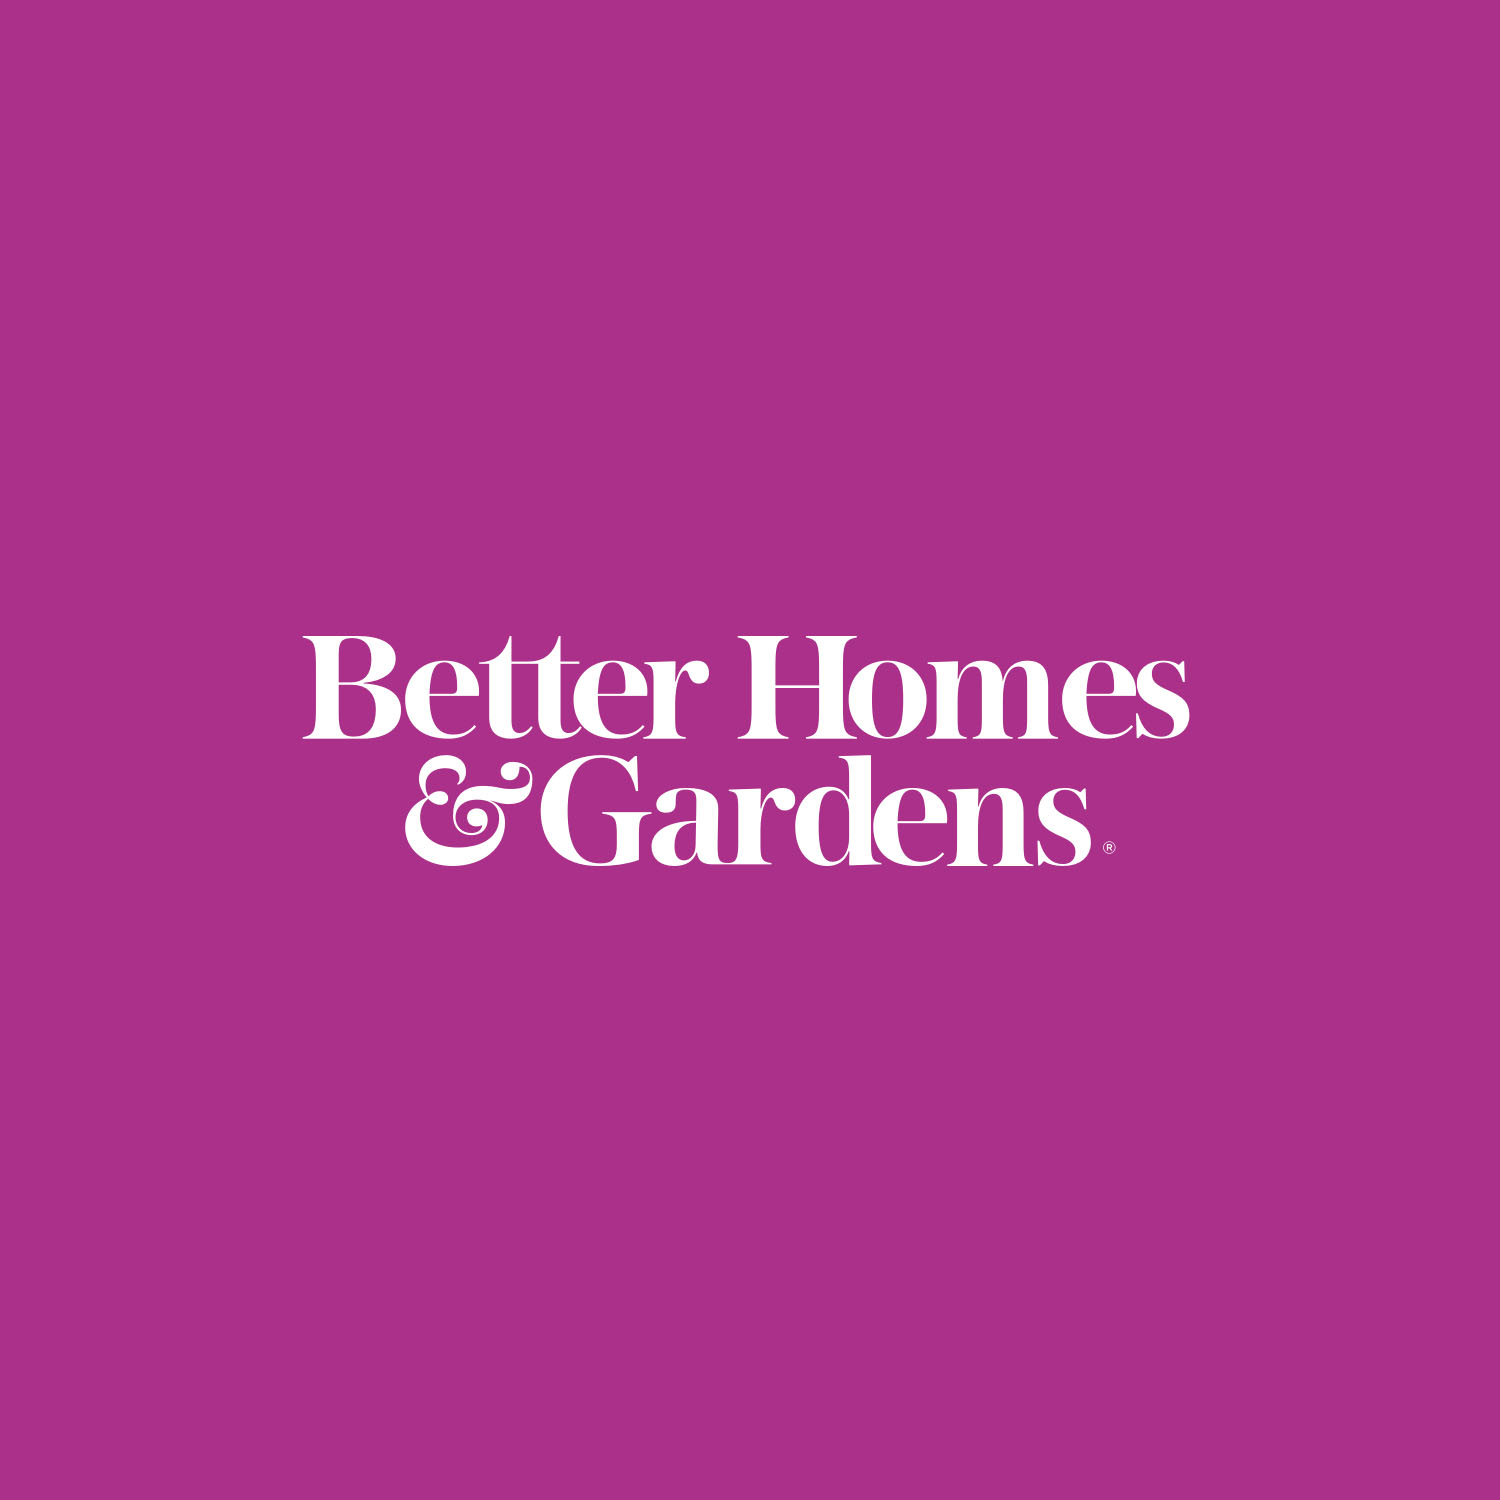 Better Homes & Gardens Interviews Age Safe America Director of Education and Advocacy